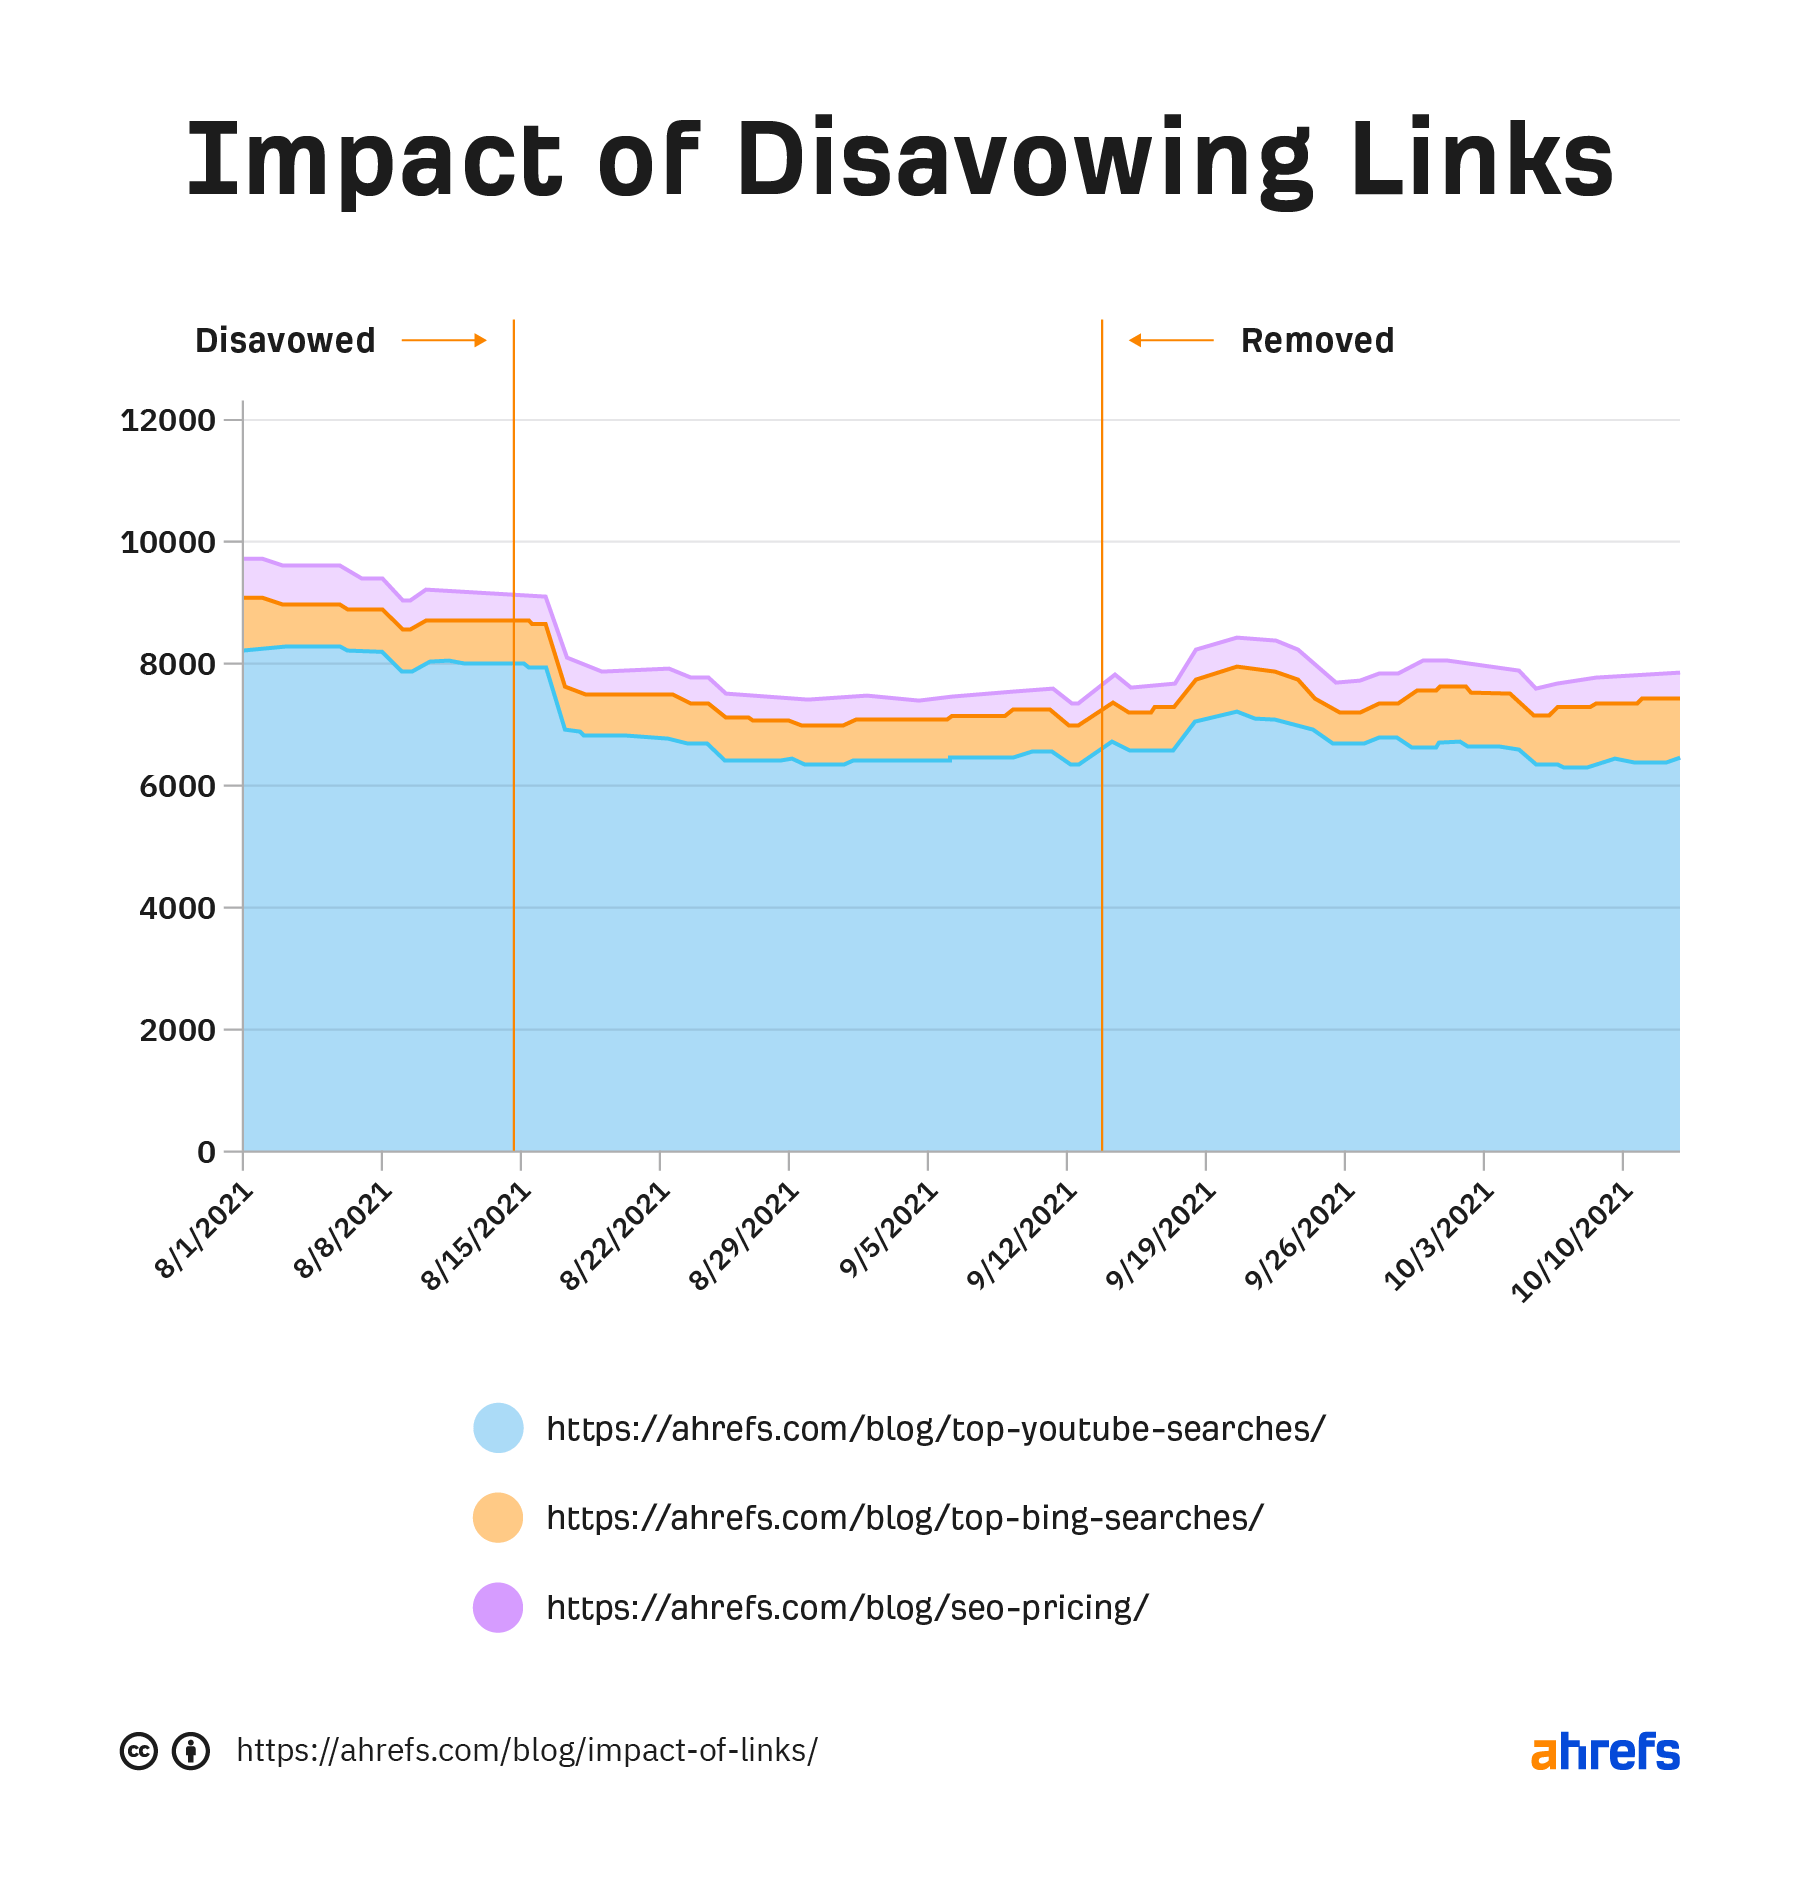 The impact of disavowing links to the Ahrefs blog